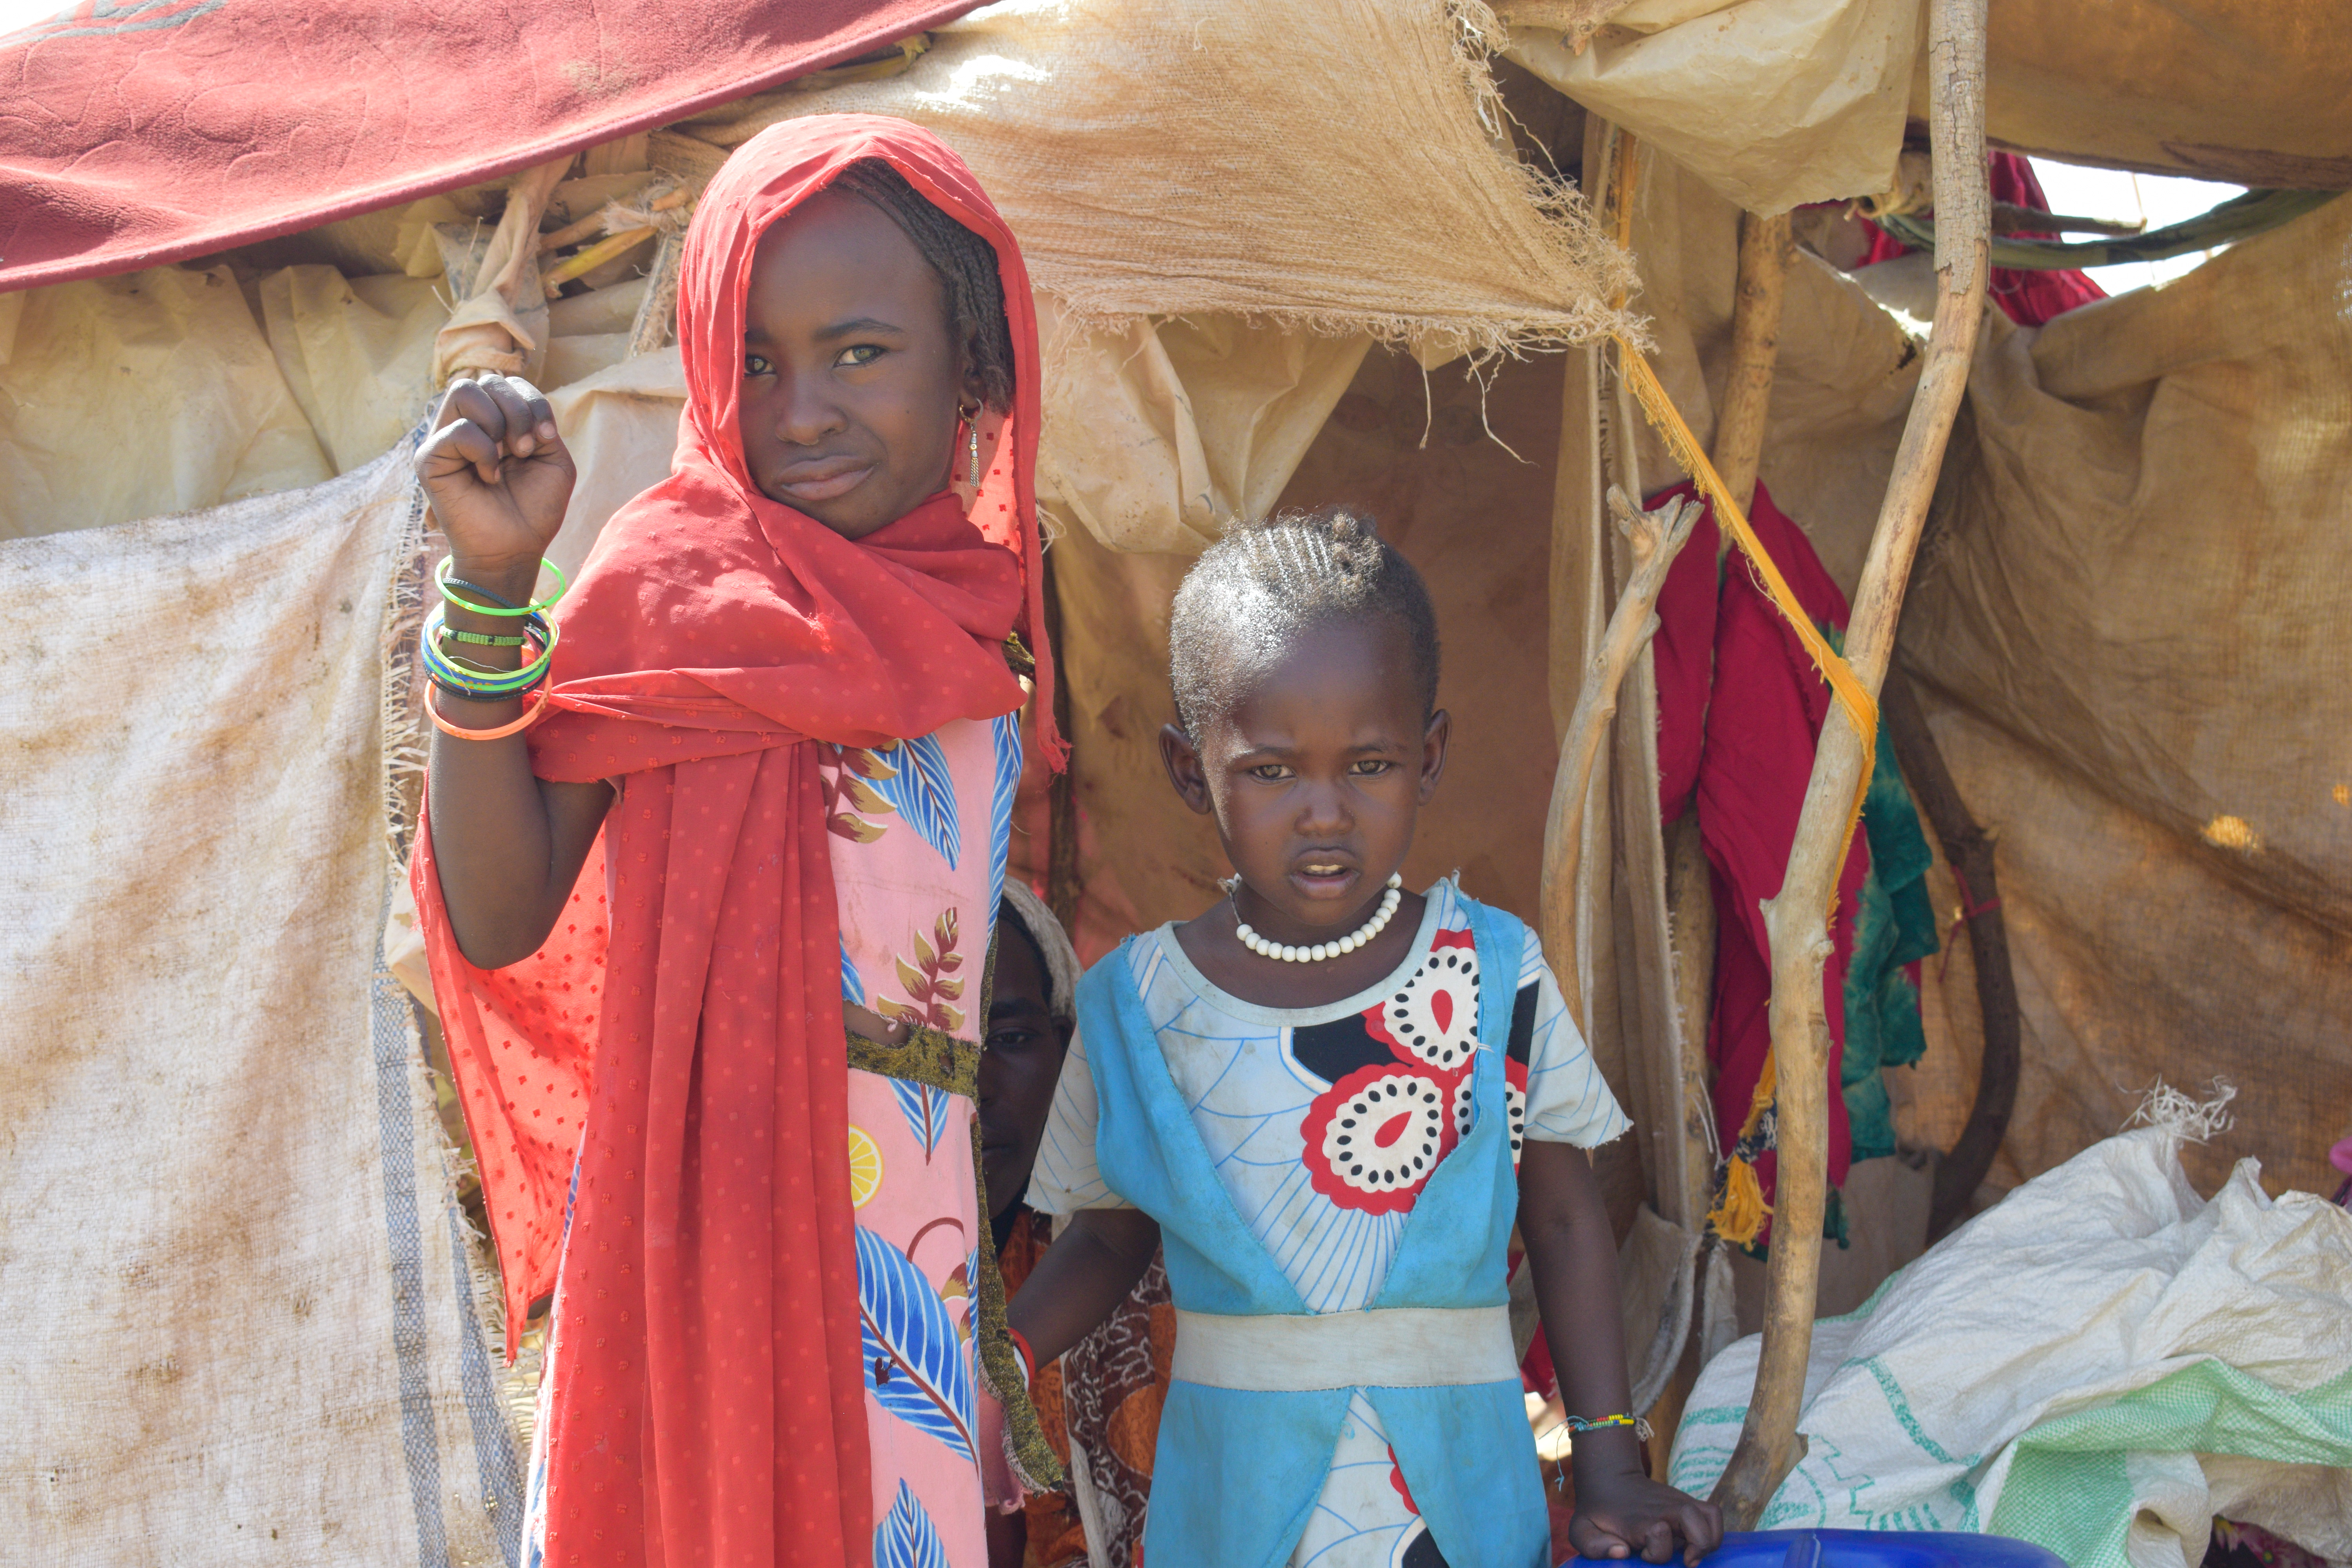 Sudanese refugees in Labane-Dafack, a transit site on Chad's eastern border.